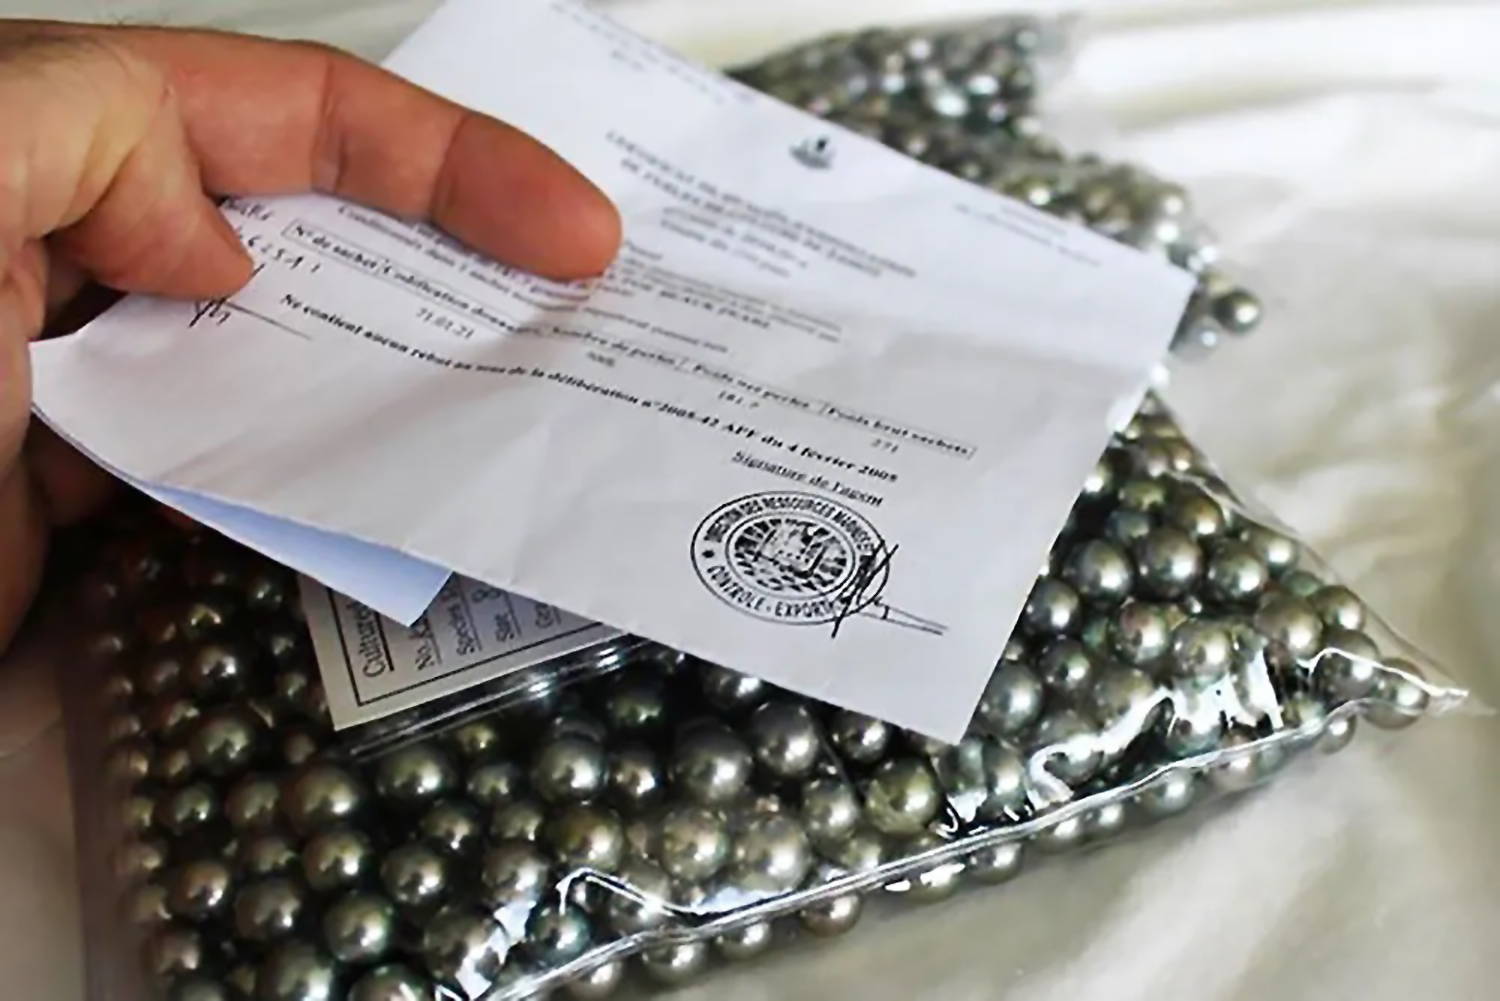 Bag of Loose Tahitian Pearls Imported from French Polynesia